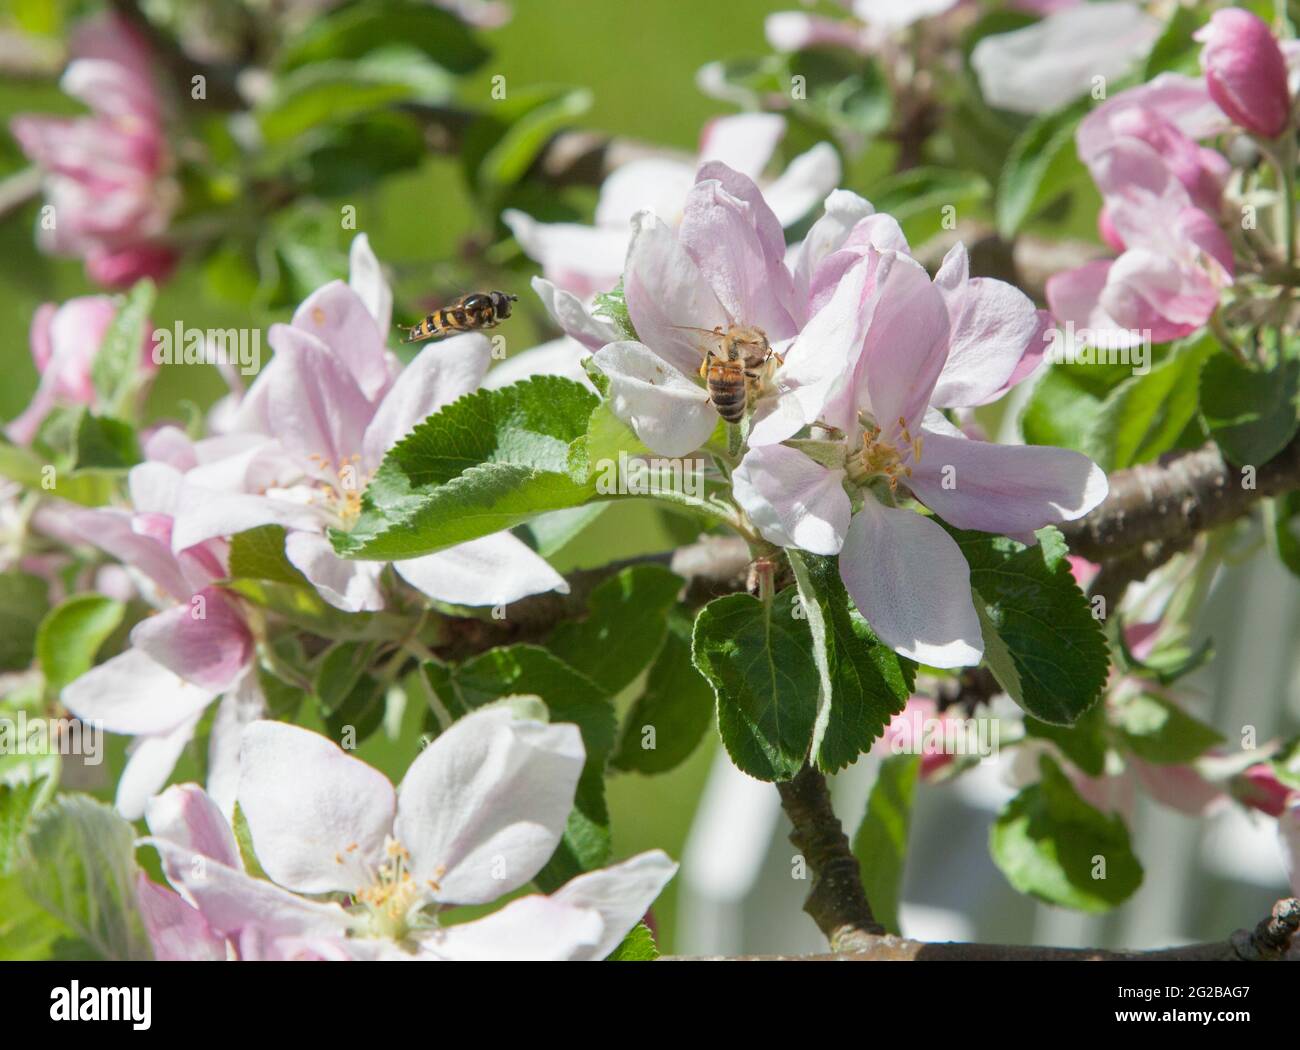 BEE collect pollen from apple blossom in garden Stock Photo